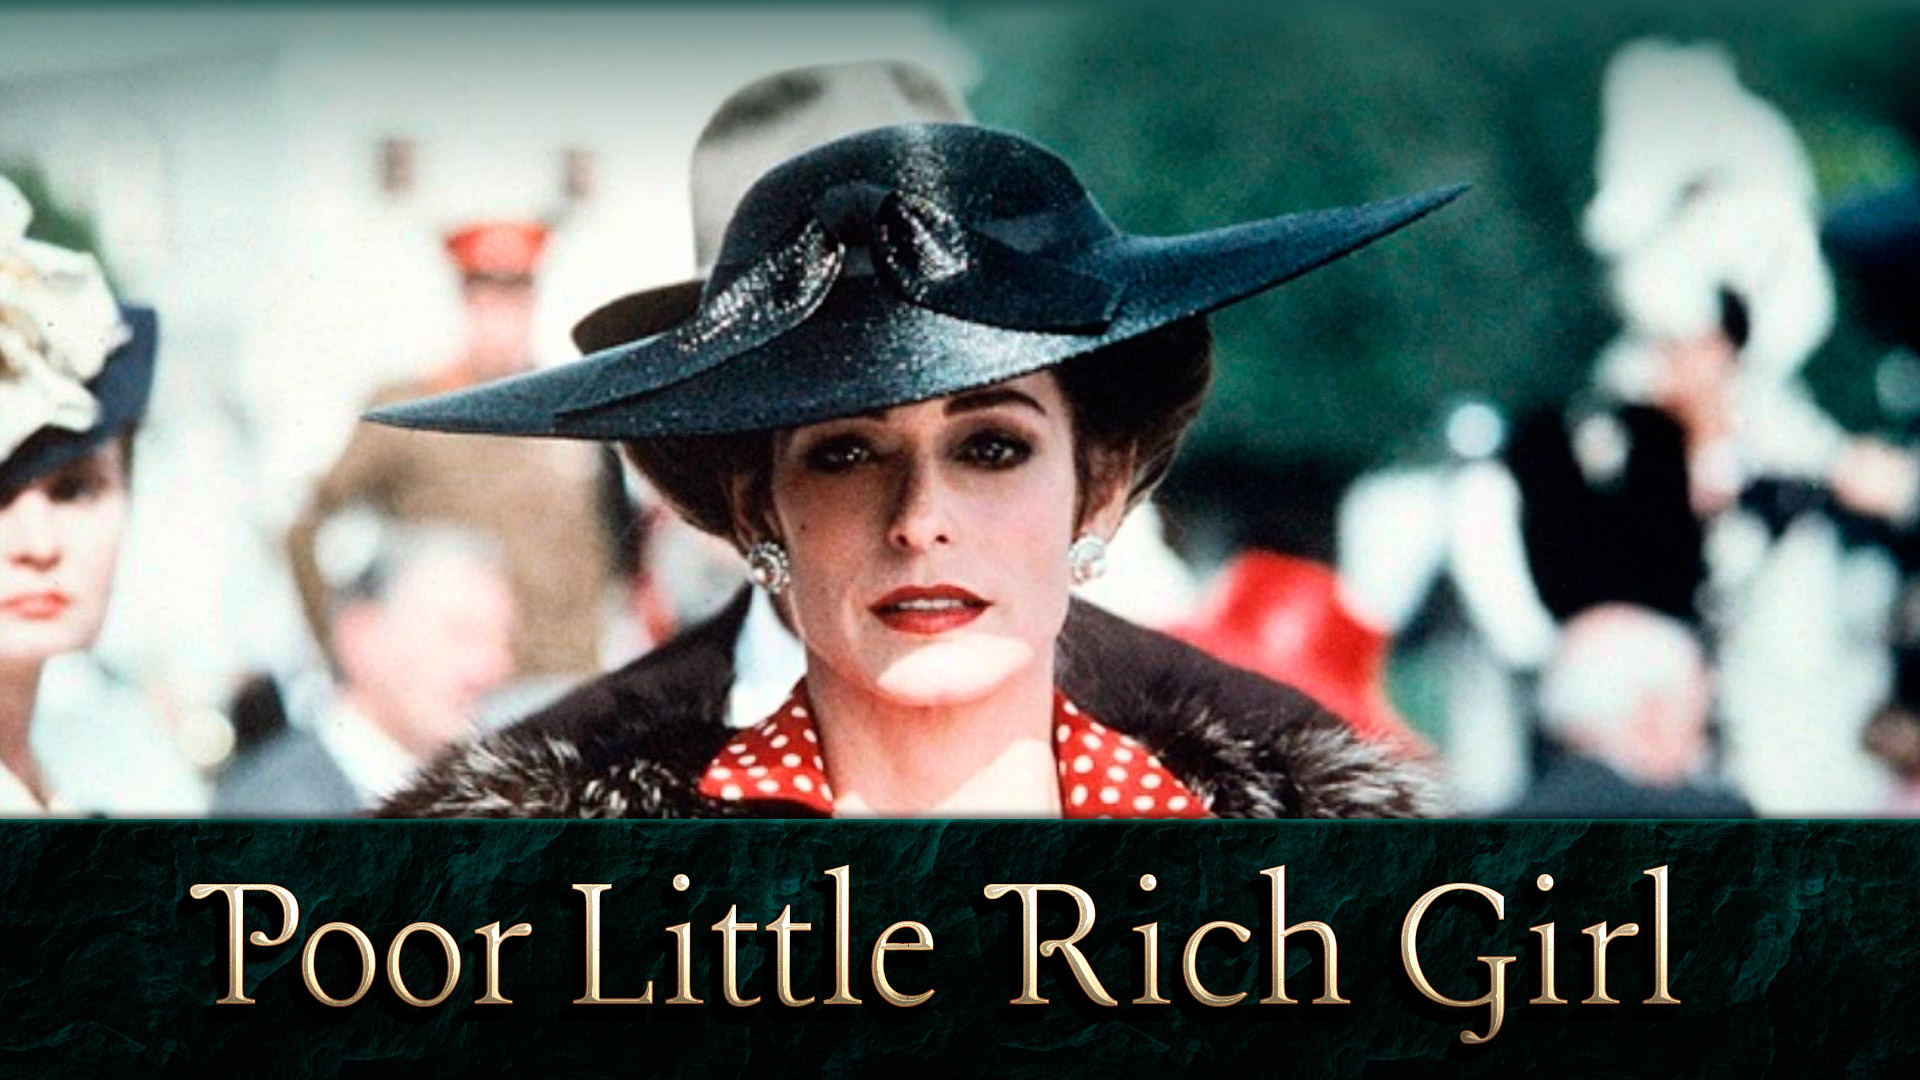 Show Poor Little Rich Girl: The Barbara Hutton Story